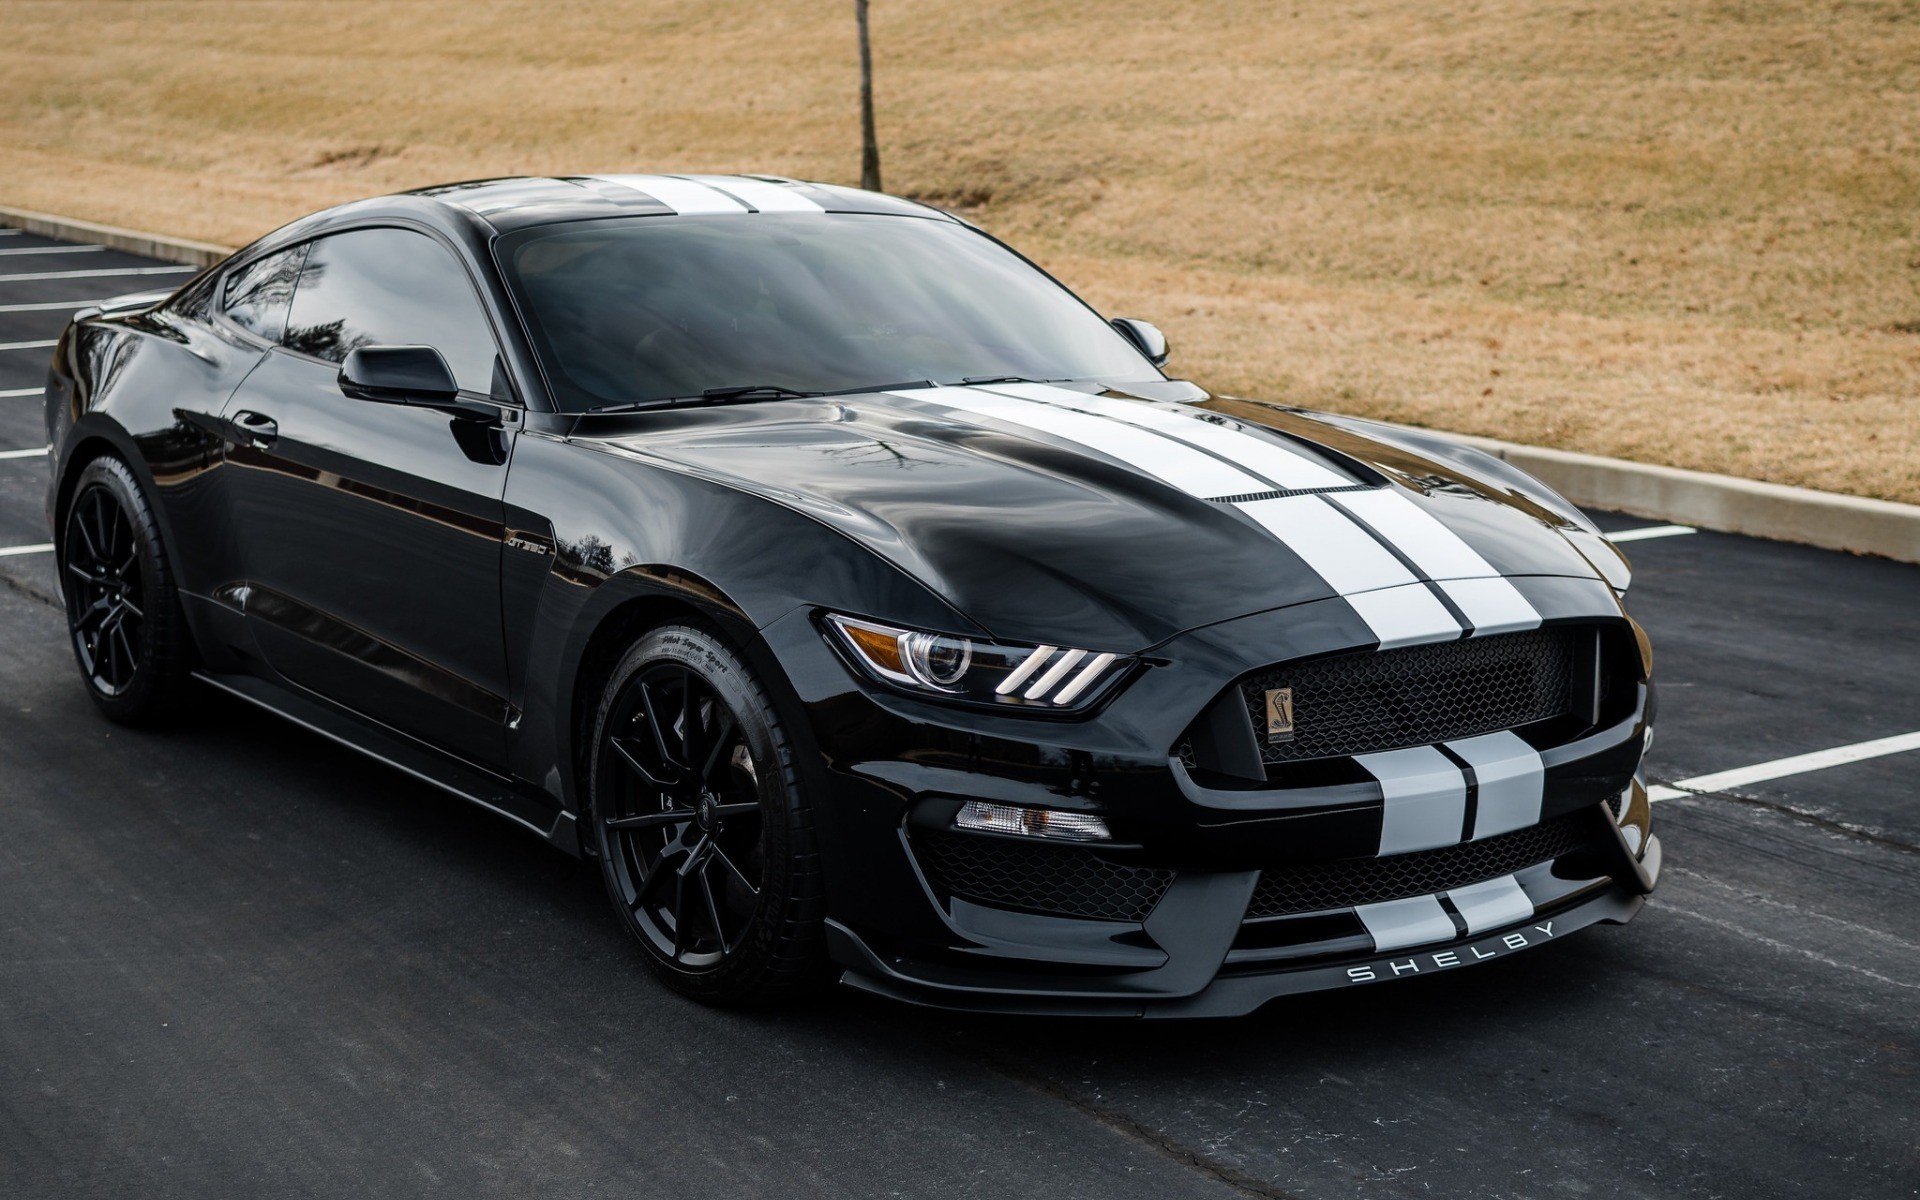 1920x1200 Ford Mustang, Shelby GT350, 2018, black sports car, supercar, luxury sports